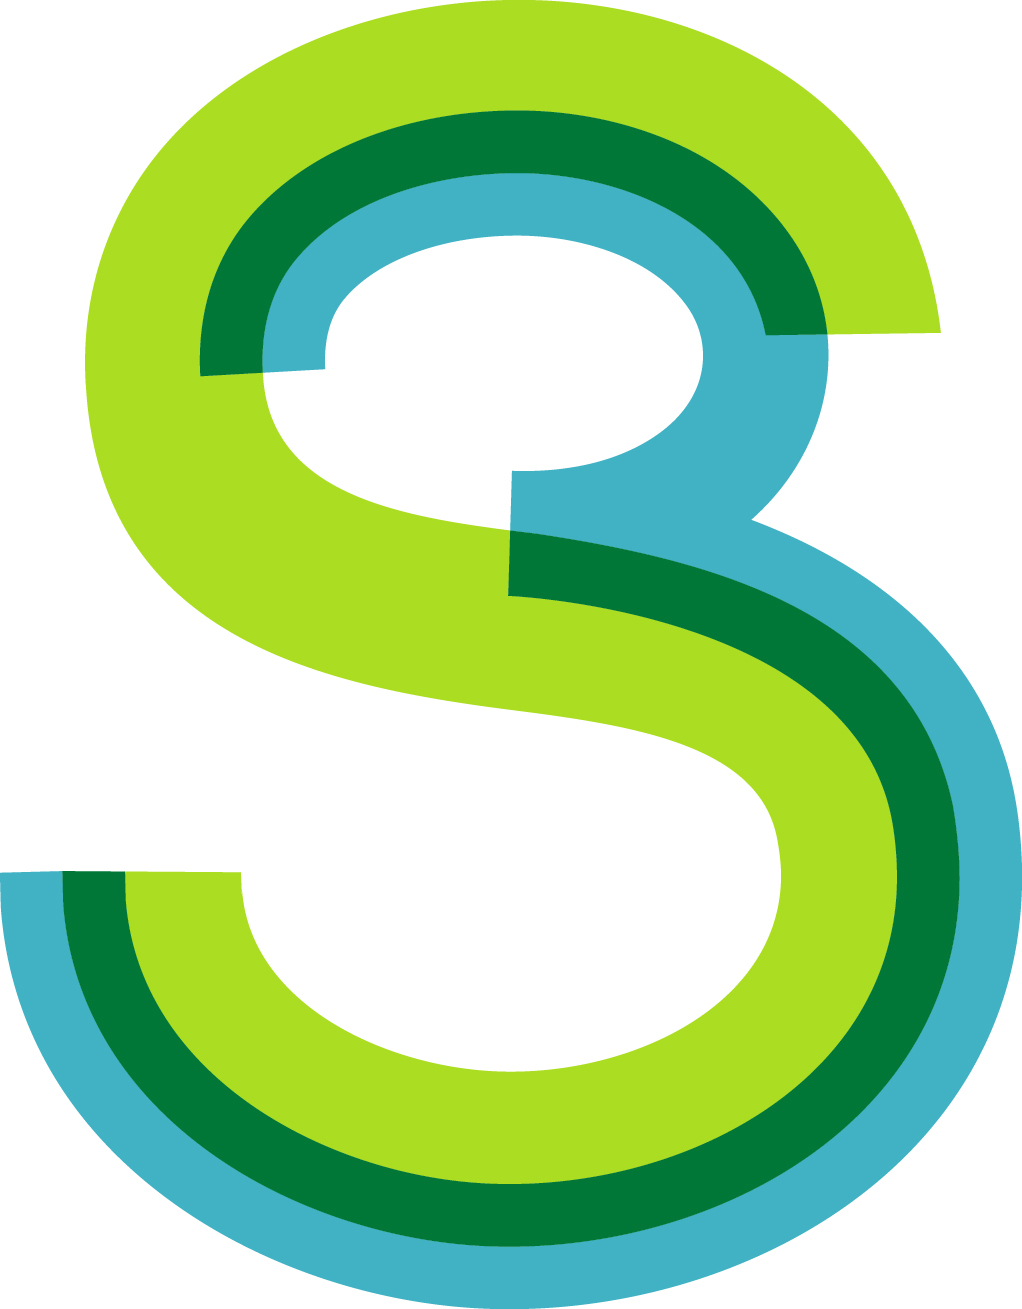 logo for Science and Society at State, an interdisciplinary seed grant program